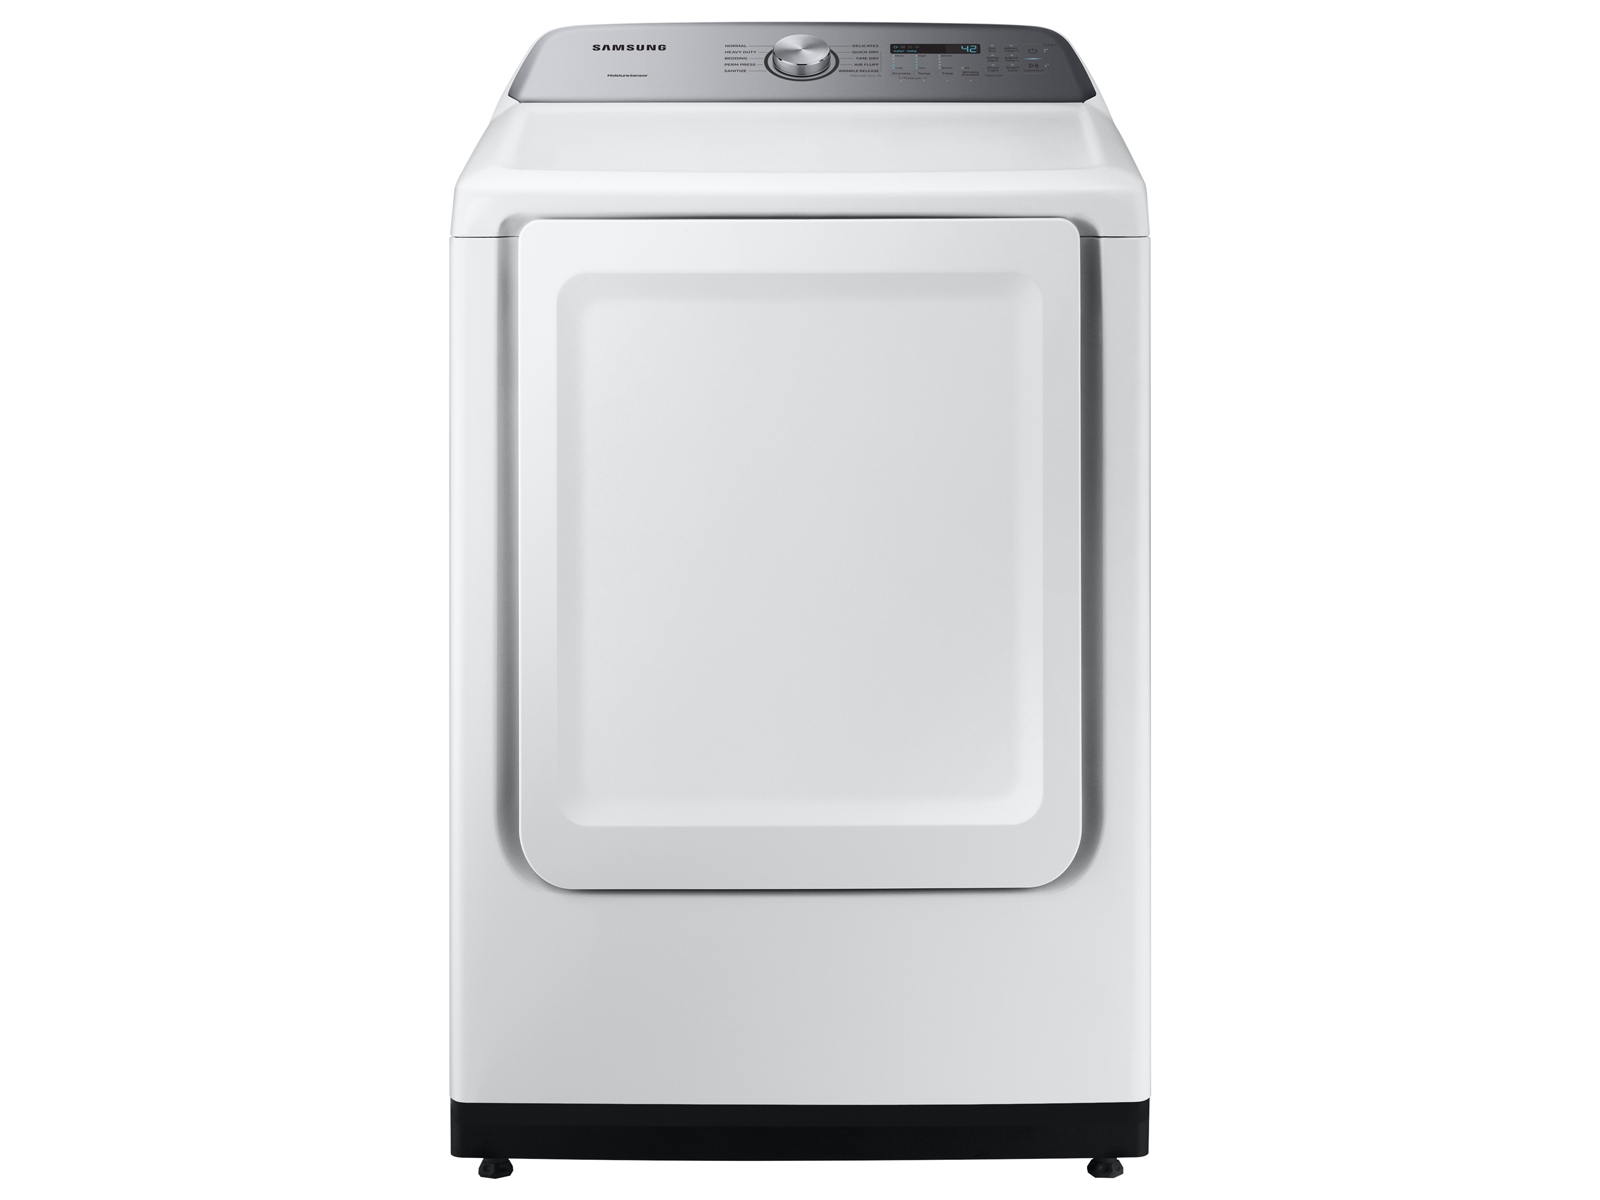 Photos - Tumble Dryer Samsung 7.4 cu. ft. Gas Dryer with Sensor Dry in White DVG (DVG50R5200W/A3)